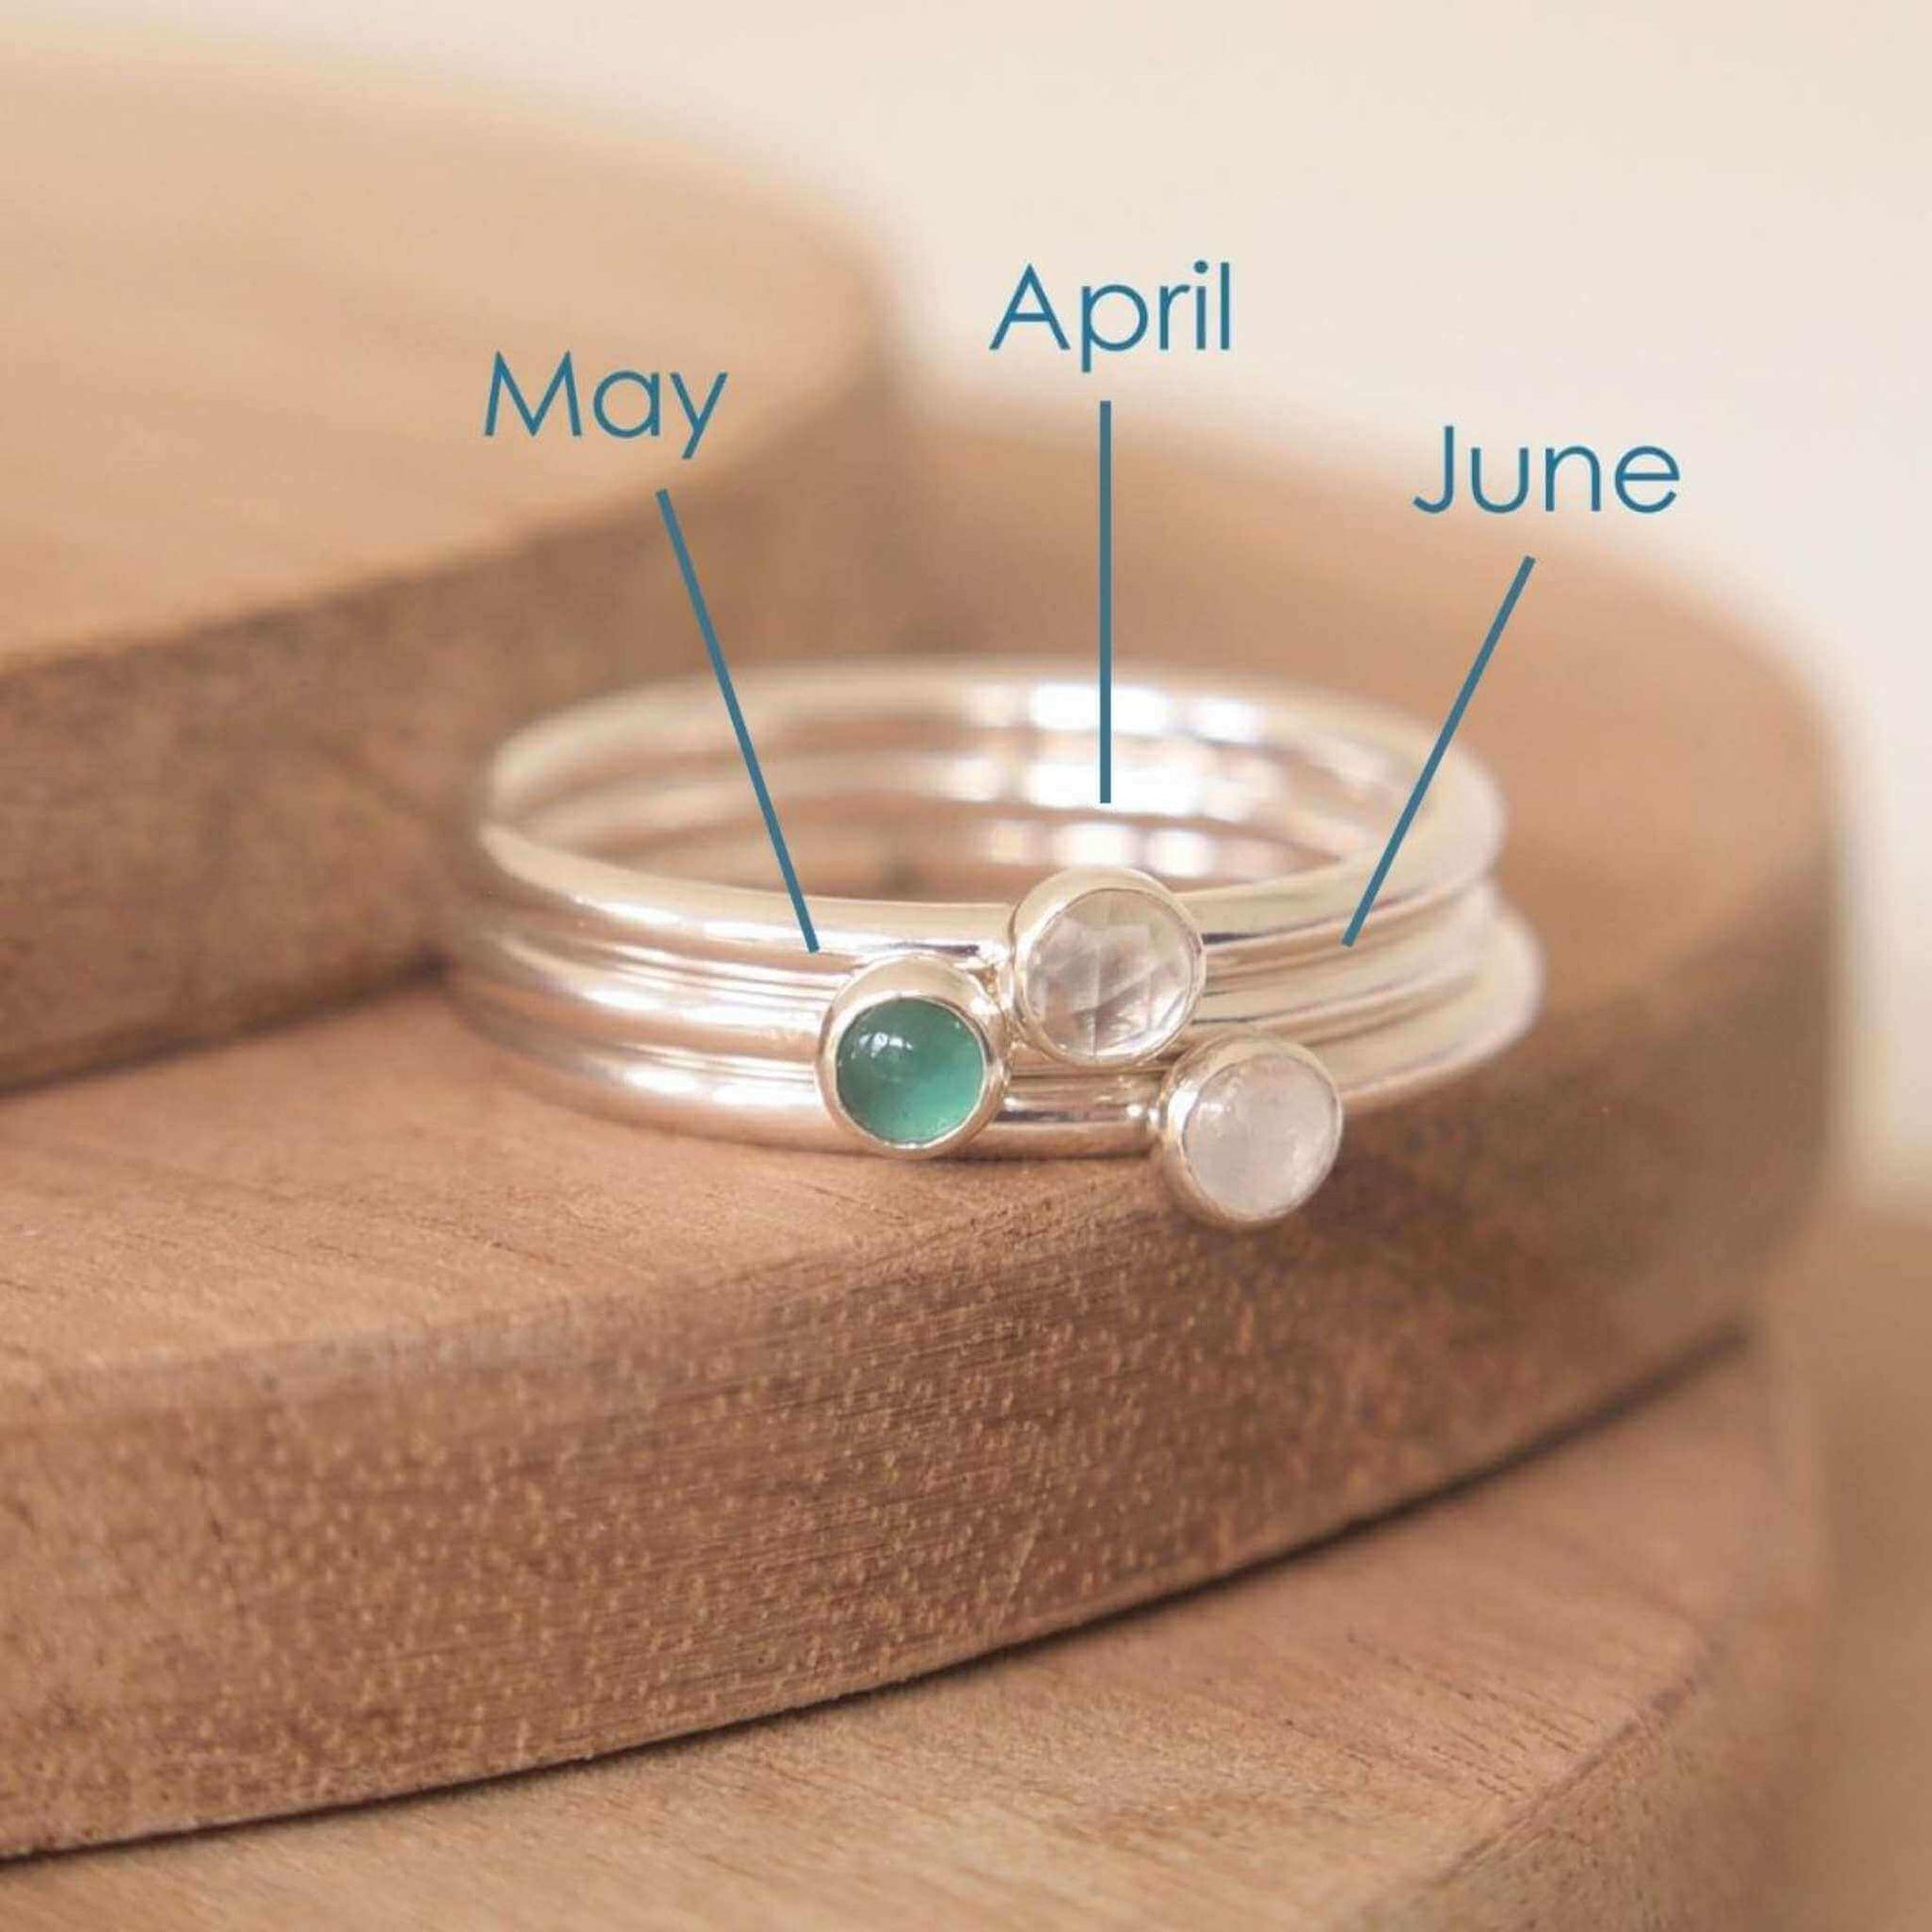 Three Silver rings, each set simply with a single gemstone in Green Agate, White Topaz and Moonstone in a round 3mm size. Birthstones for April, May and June